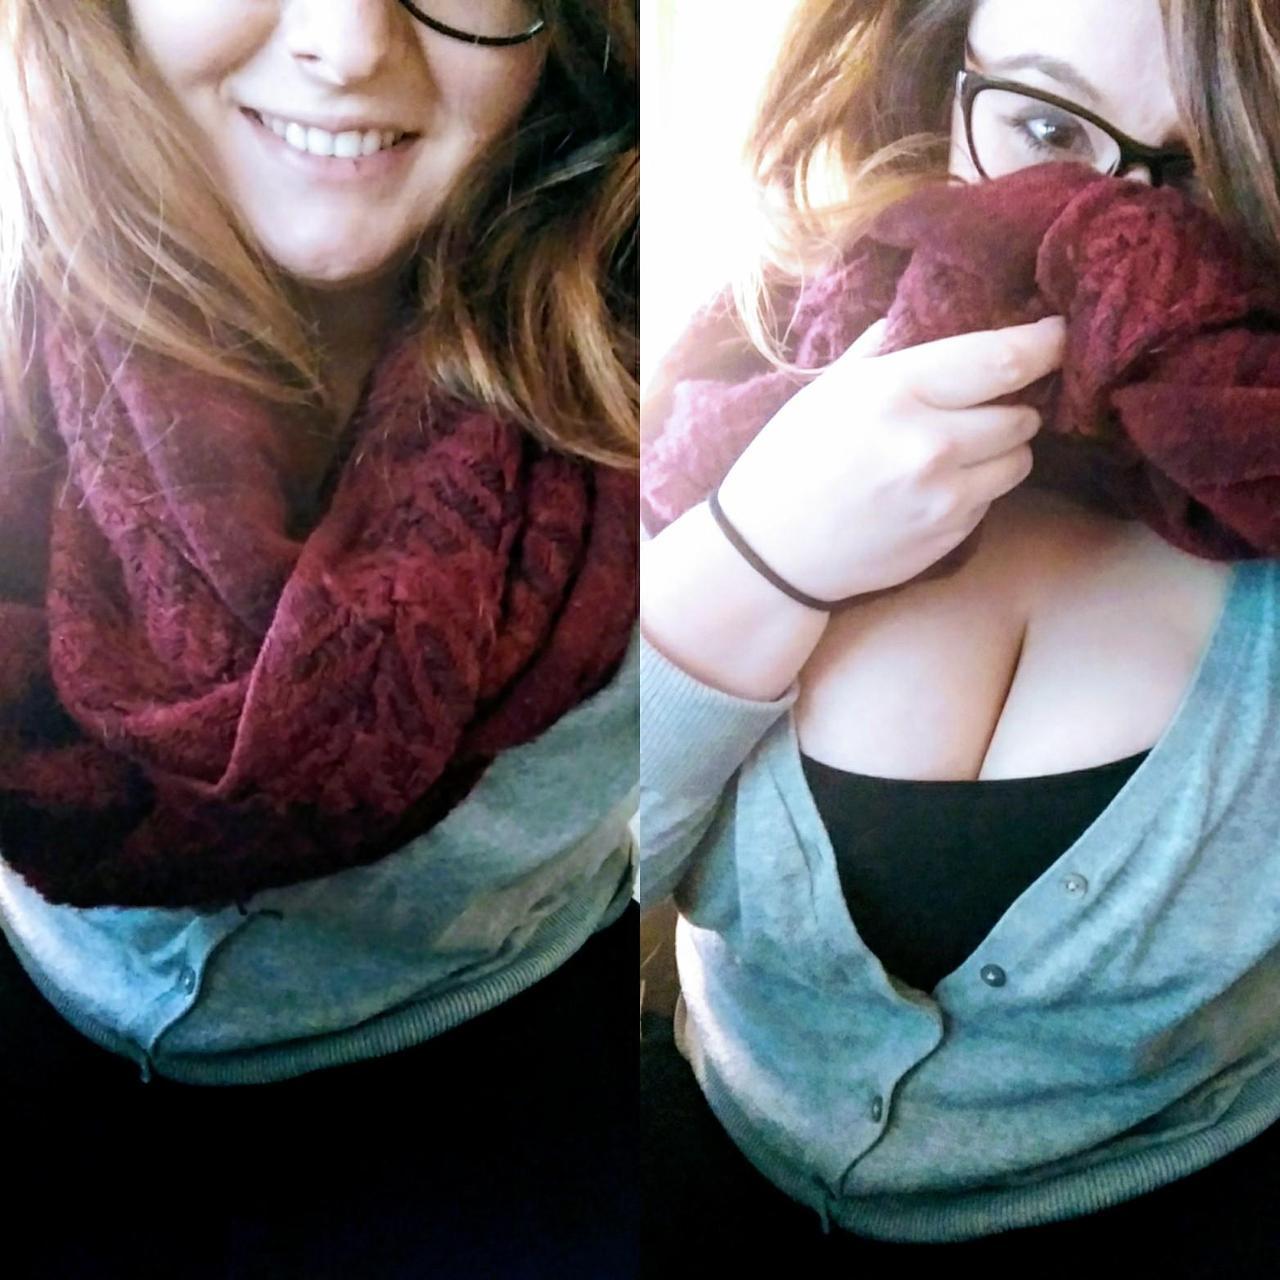 guess what im hiding under scarf at work today porn